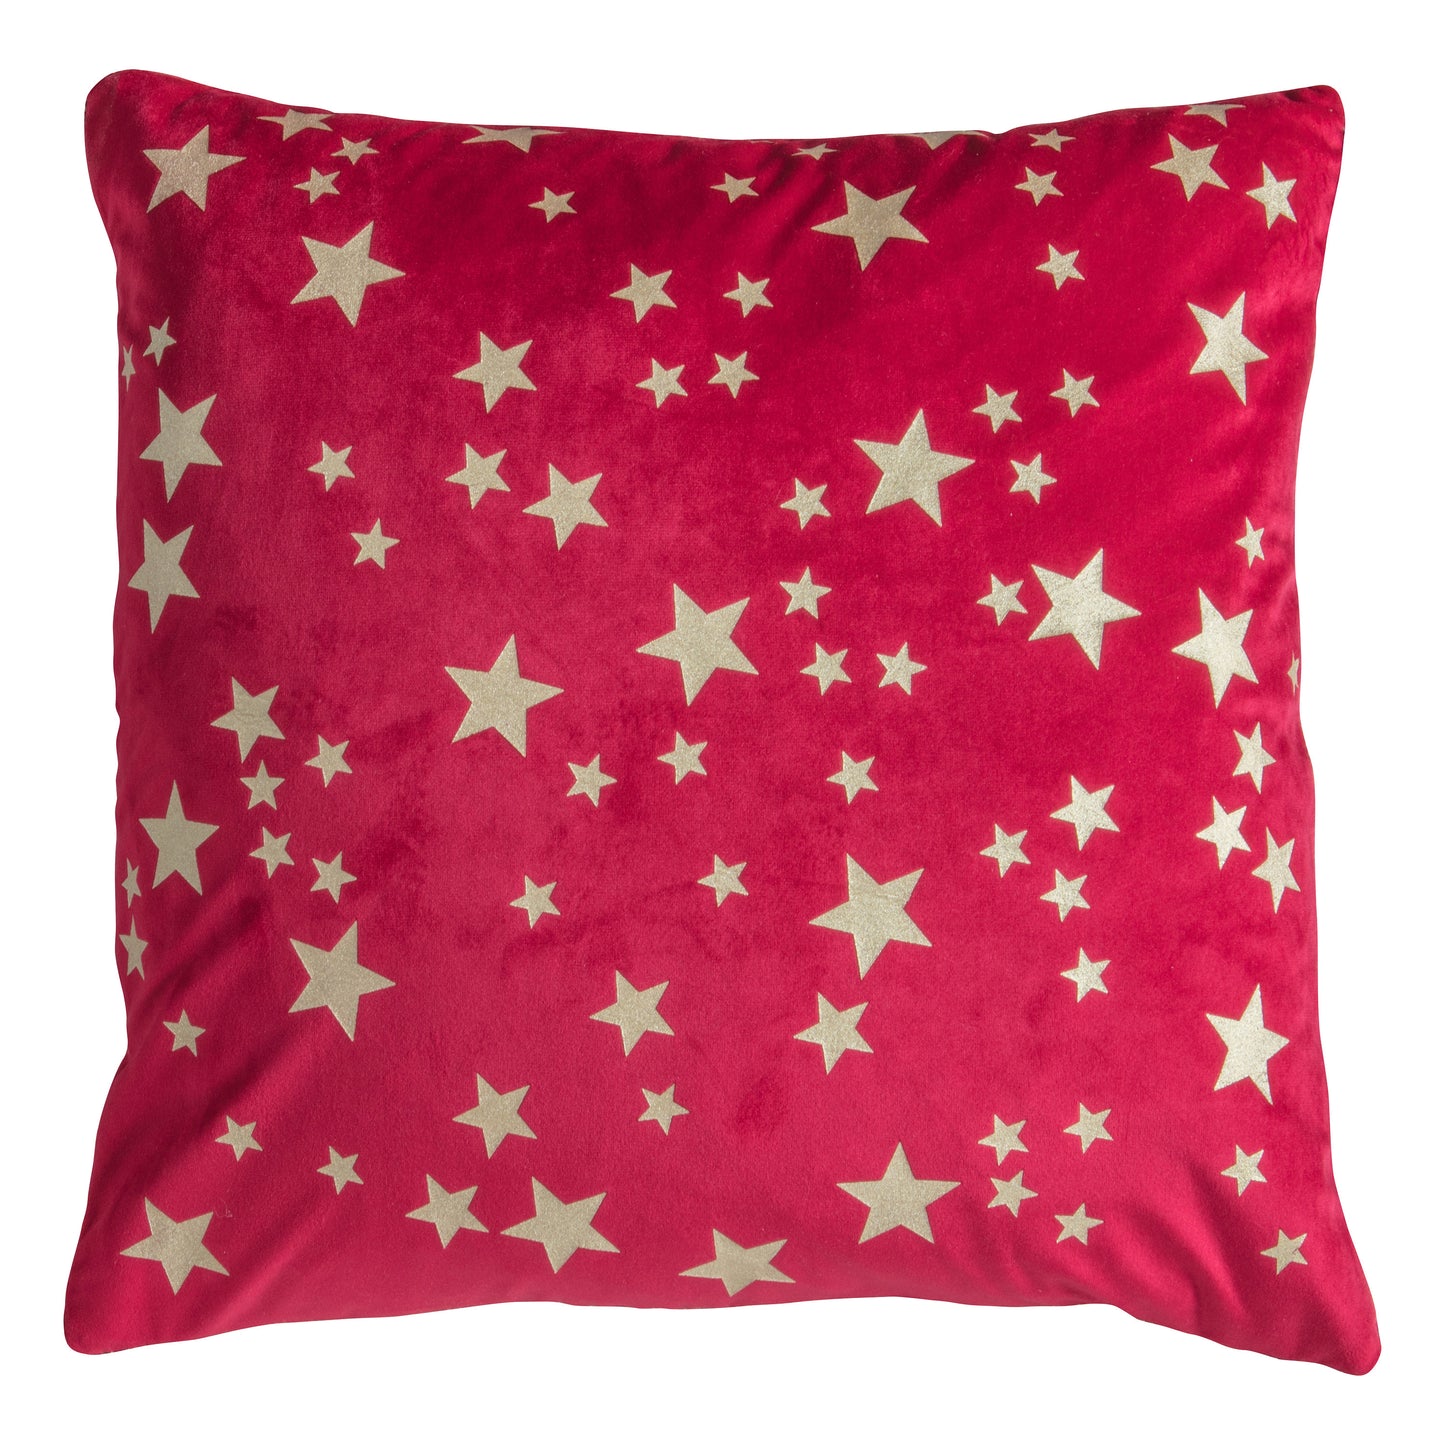 A Star Metallic Velvet Cushion Red 450x450mm, perfect for interior decor.